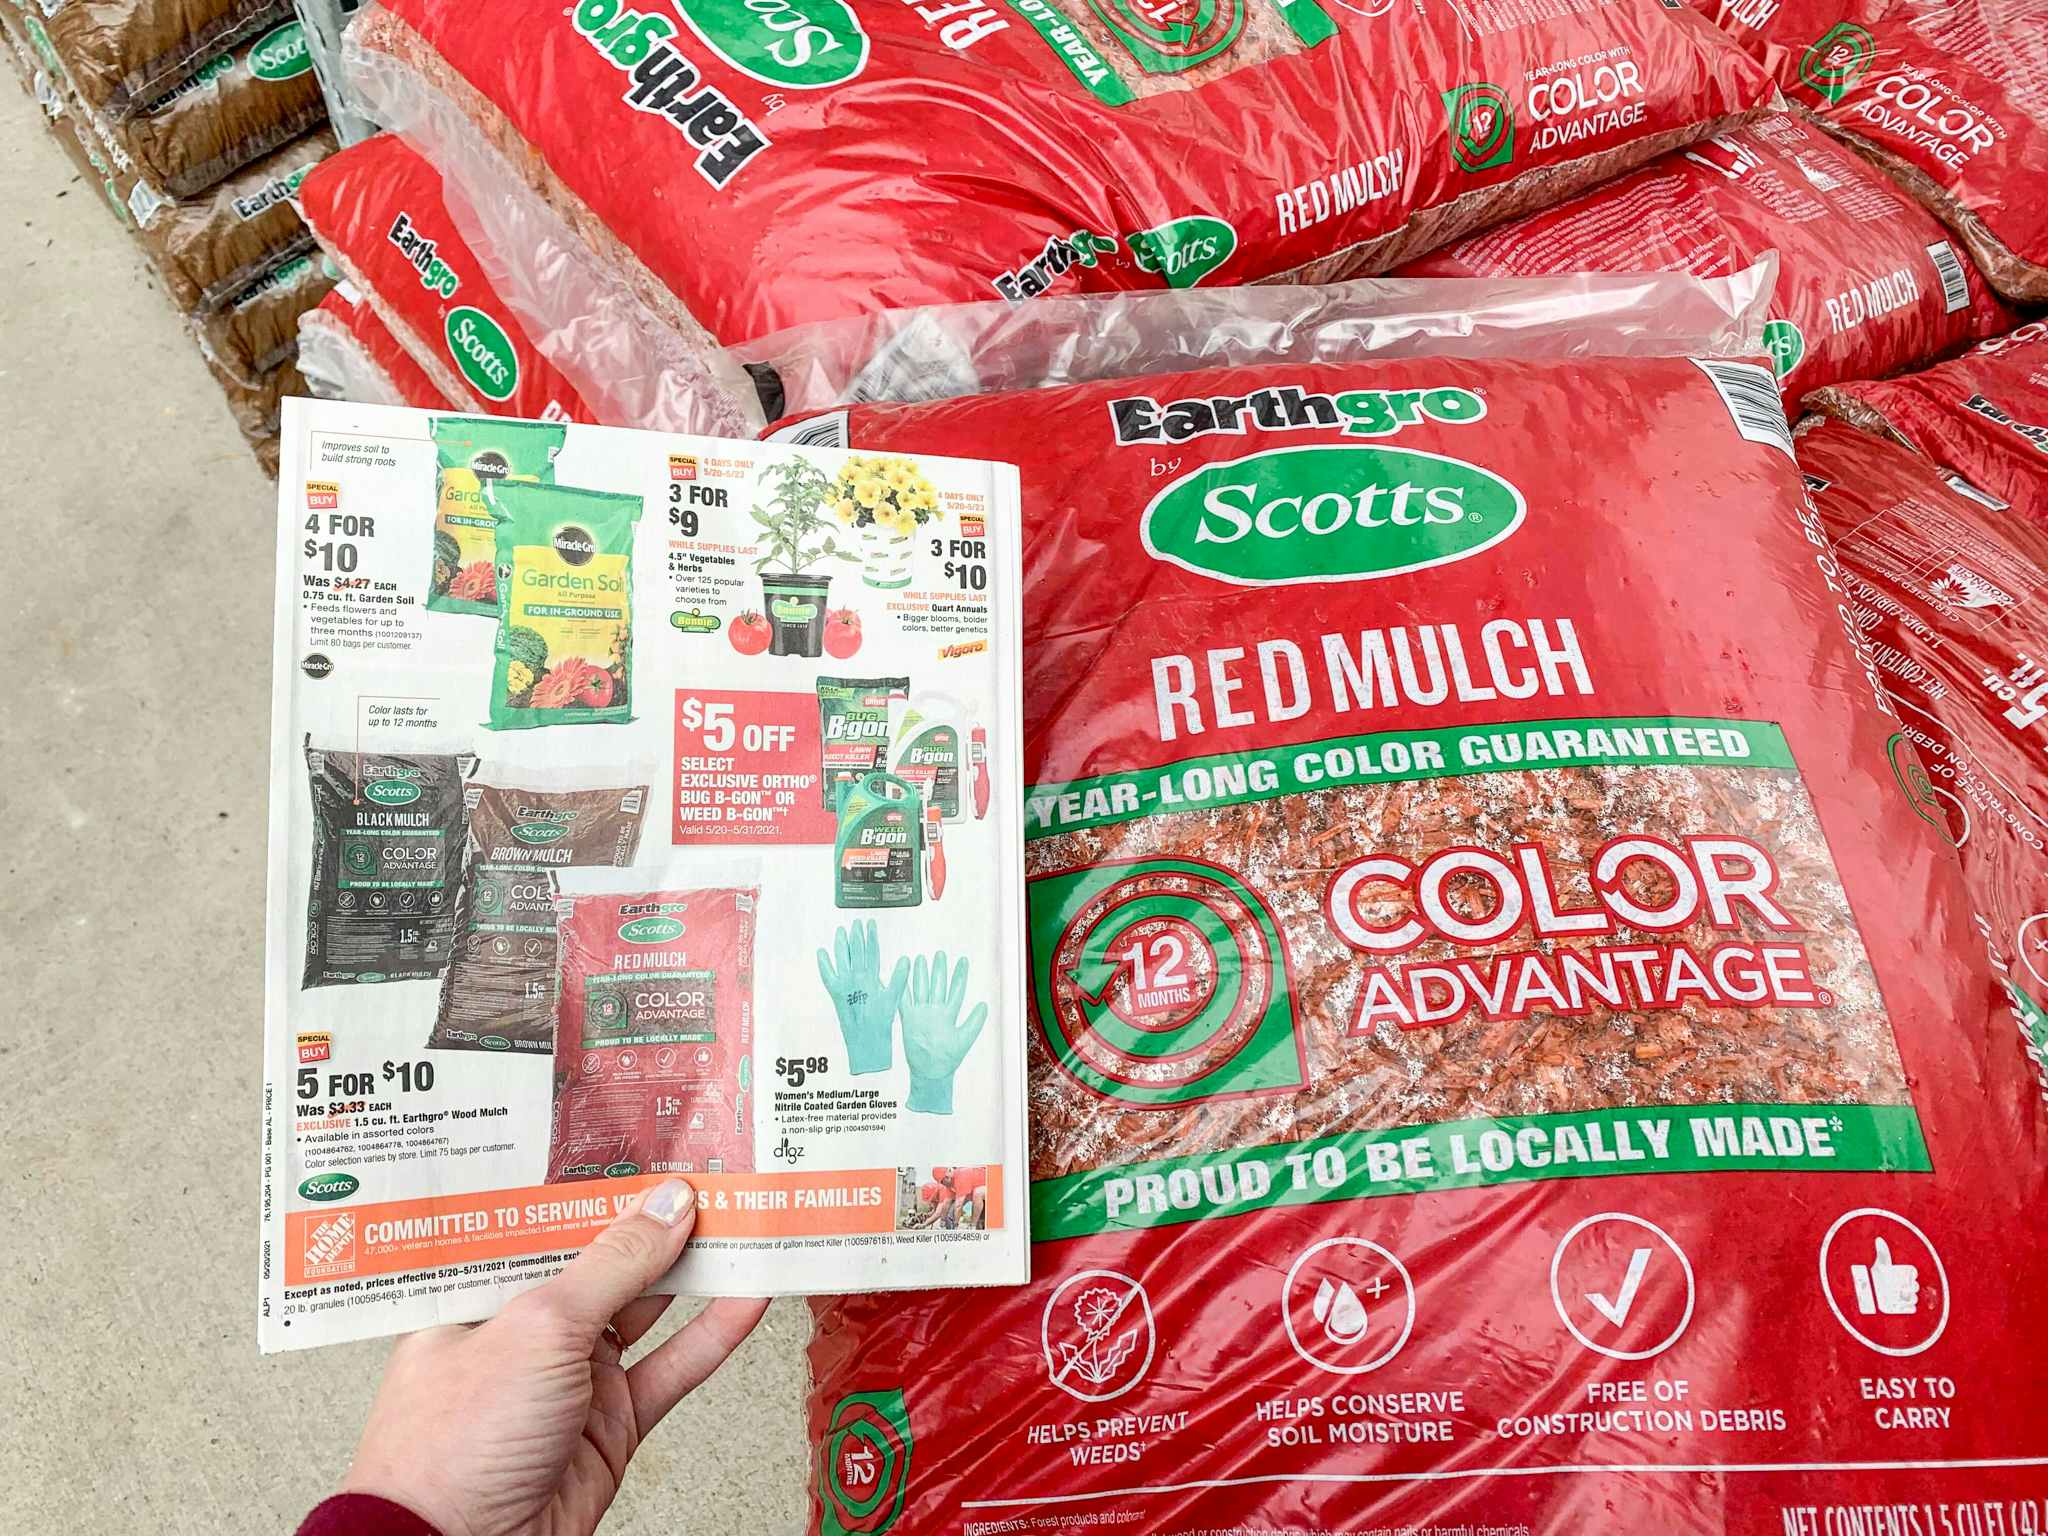 A hand holding a home Depot Memorial Day Sale ad next to a bag of Earthgro by Scotts red mulch.